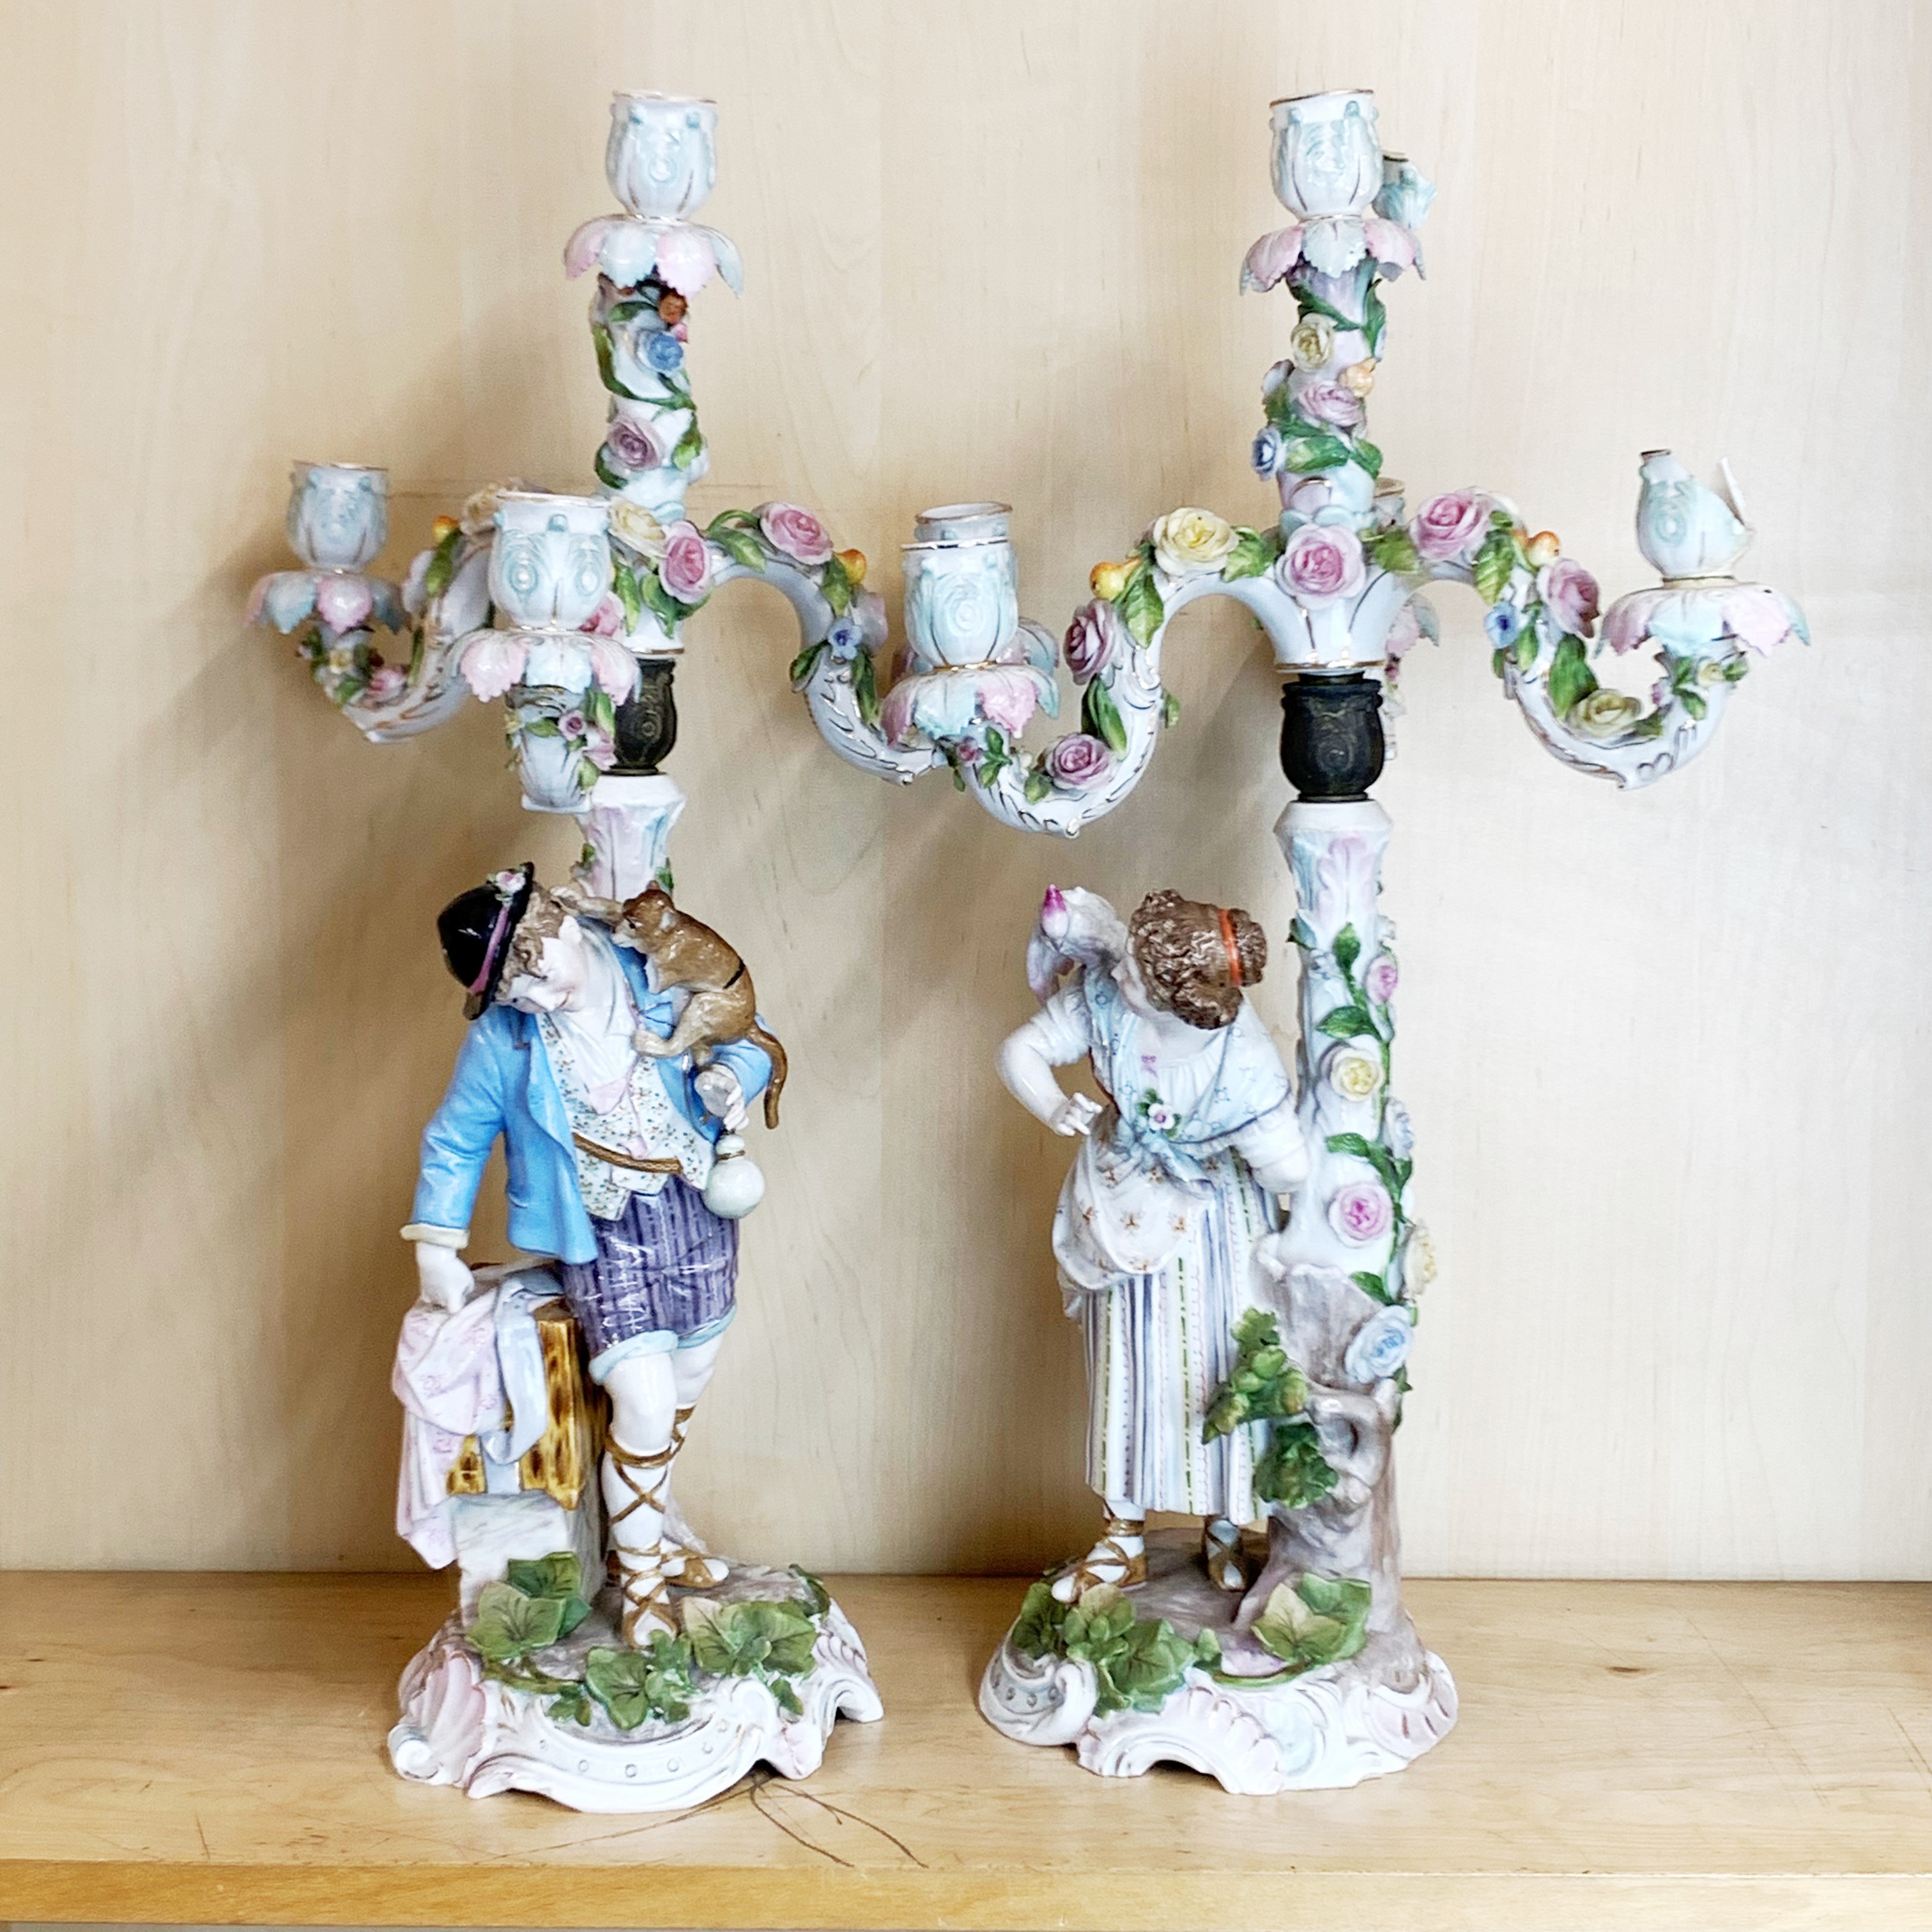 A pair of large 19th century hand-painted porcelain candelabras, H. 52cm. some damage, part of the